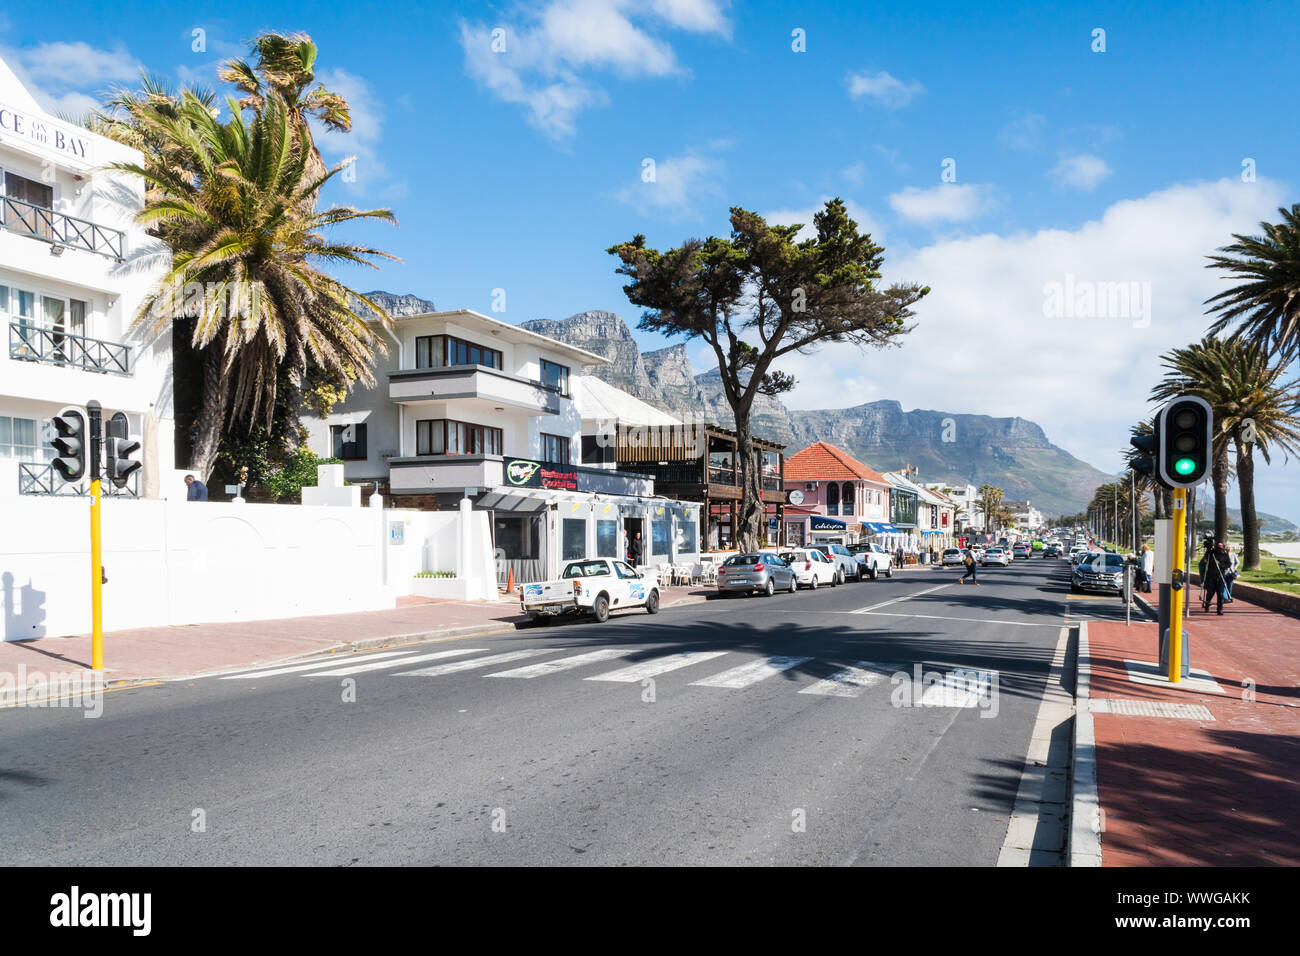 Camps Bay, upmarket suburb of Cape Town, South Africa, looking down the main road at shops, restaurants and apartment buildings on a Spring day Stock Photo